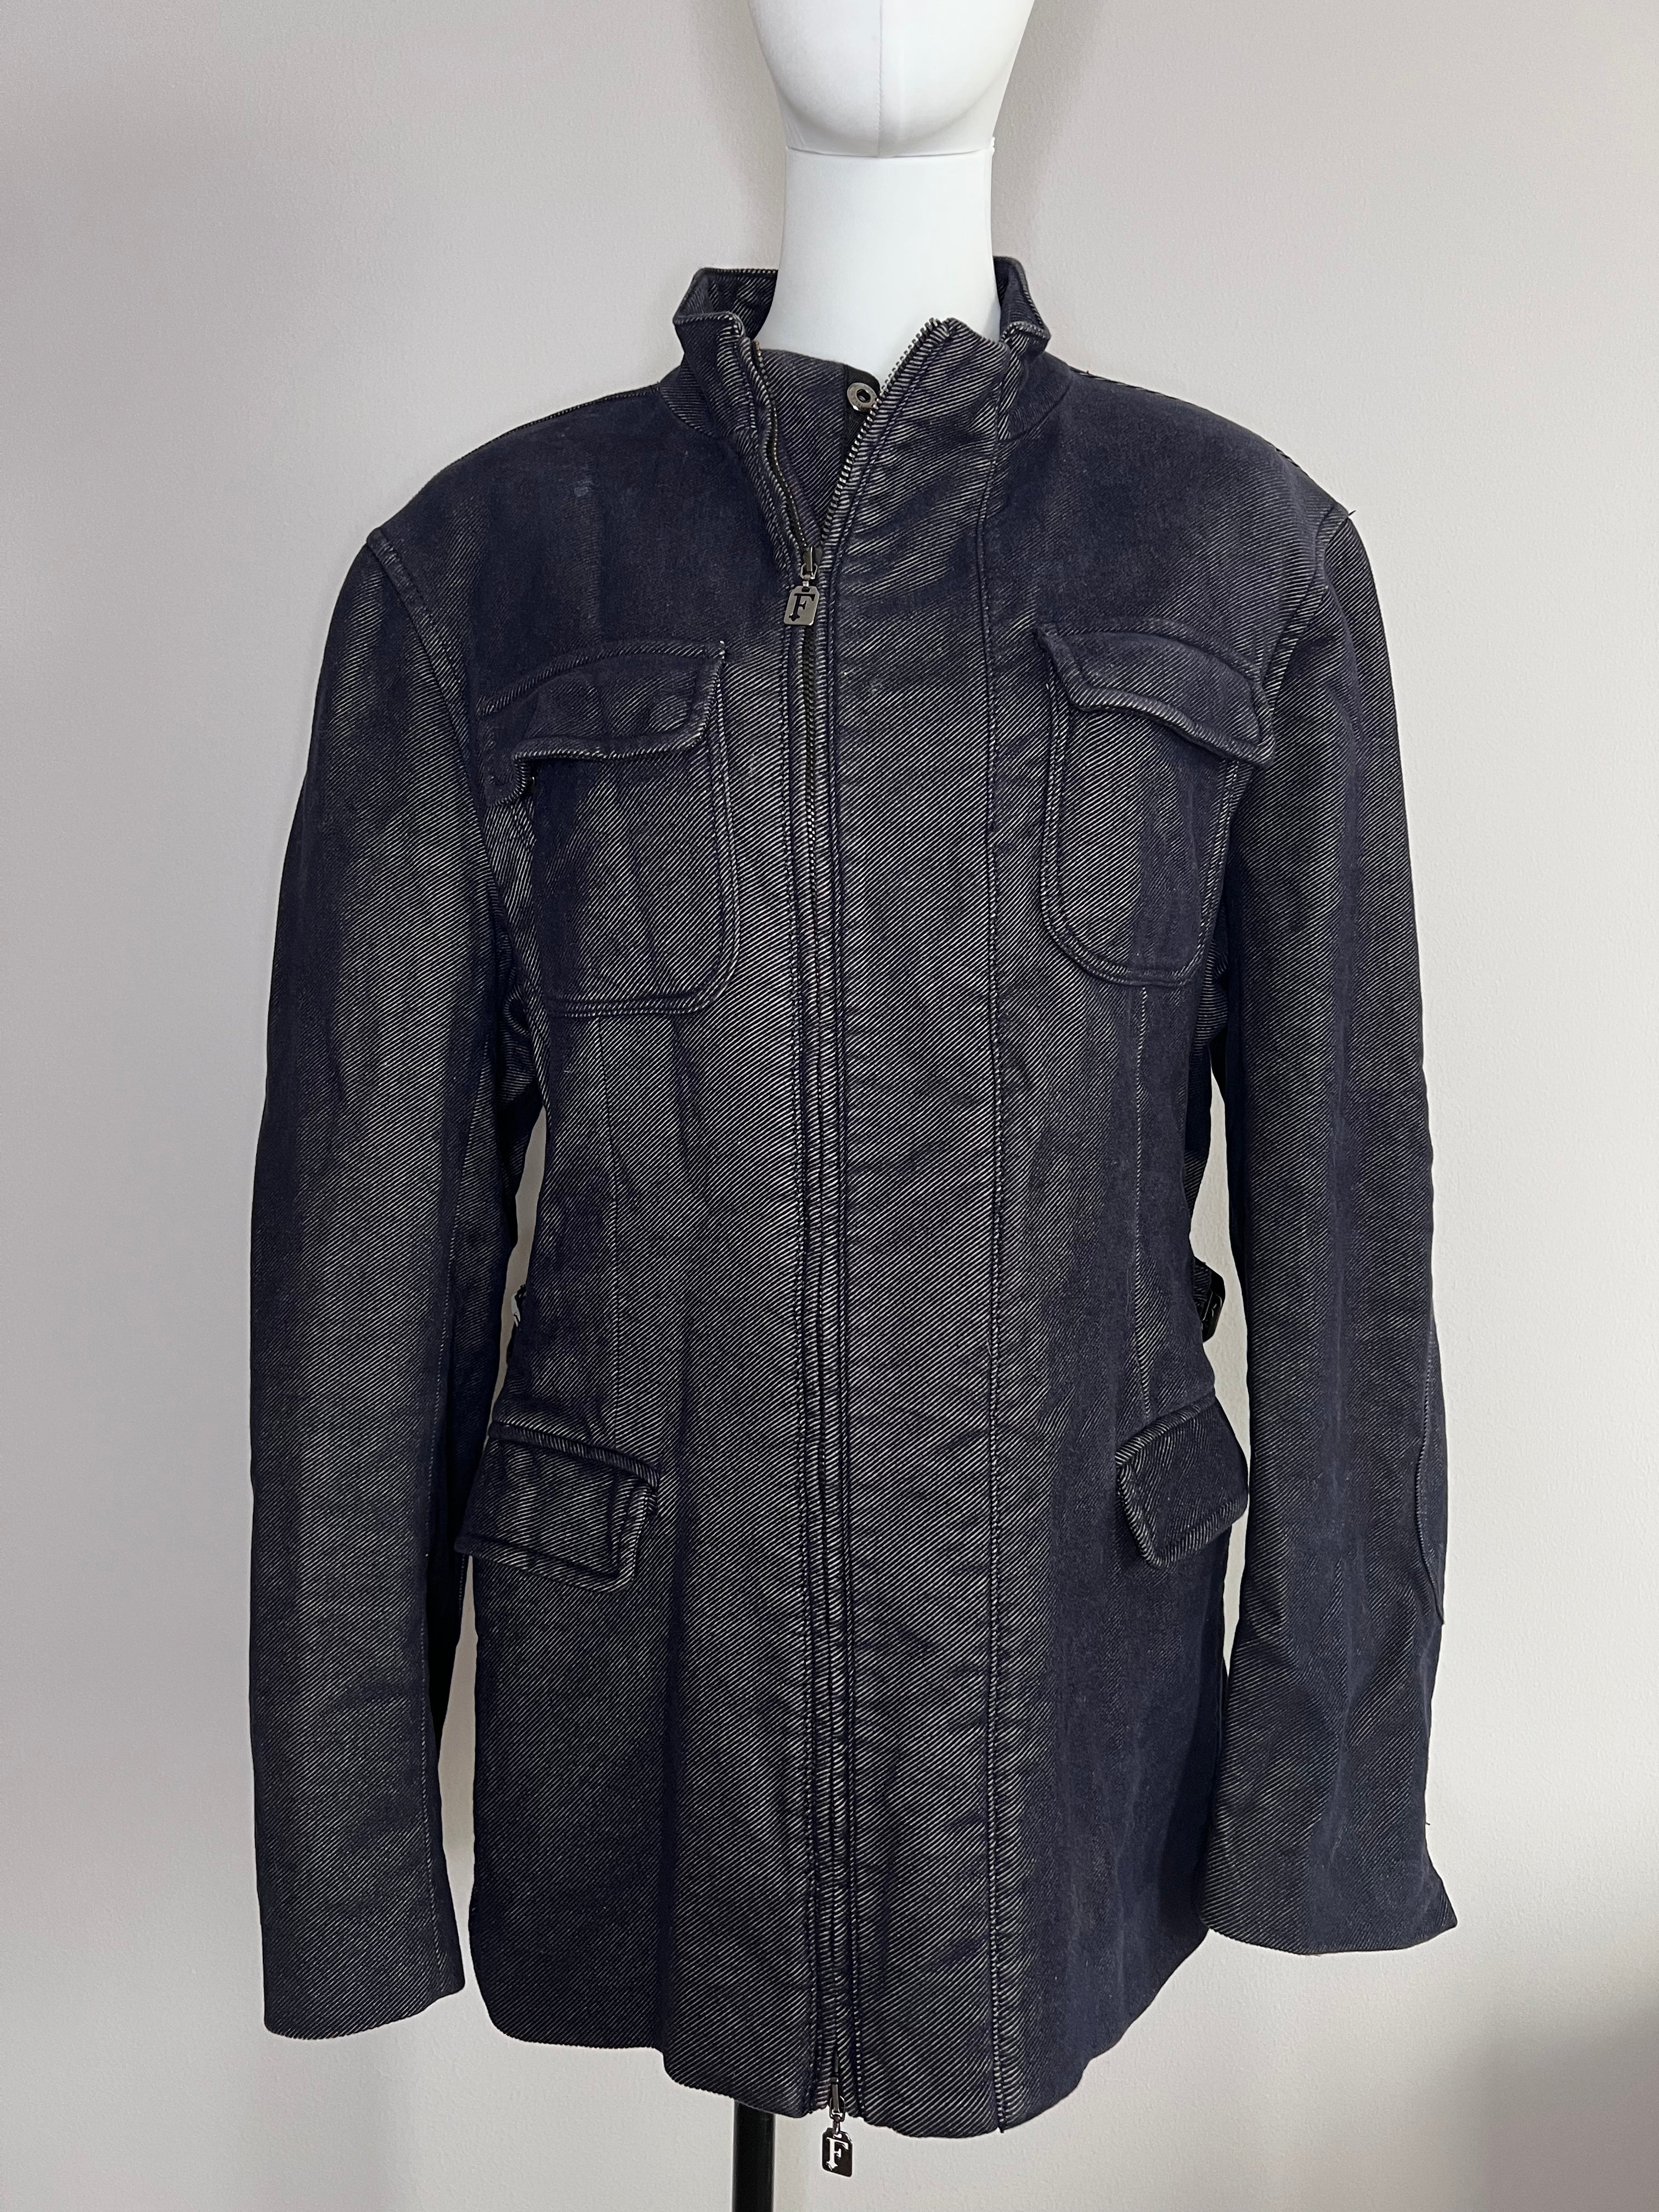 Men's Collection-Oversized denim jacket with pockets at the chest and suspenders at the waist. - FERRÉ